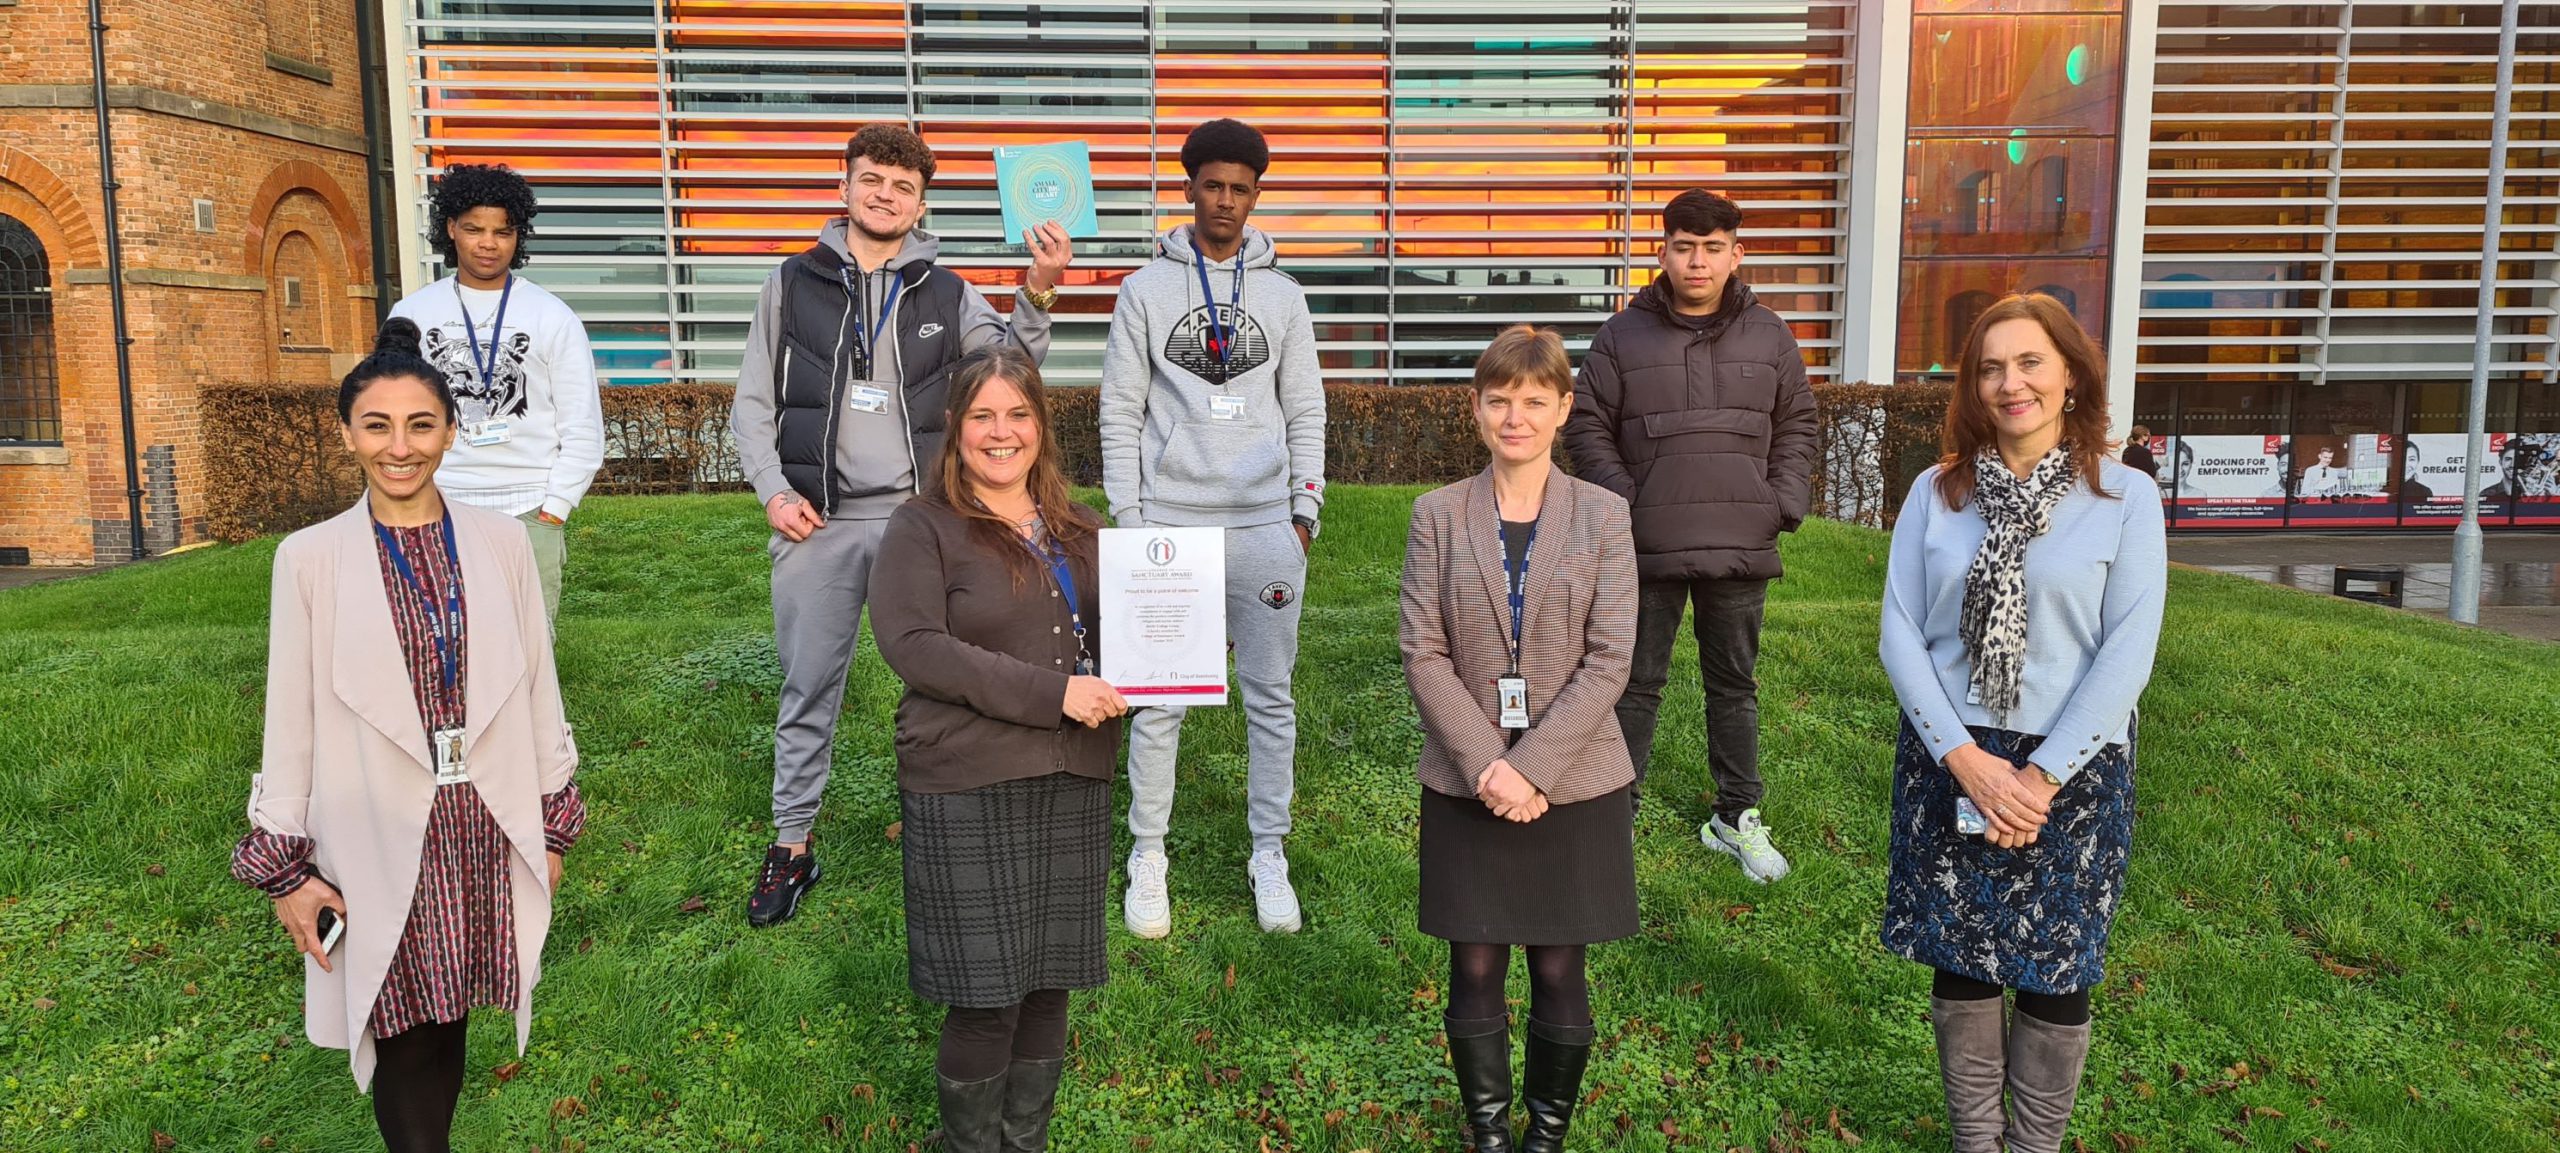 Derby College Group staff and students holding the College of Sanctuary certificate.